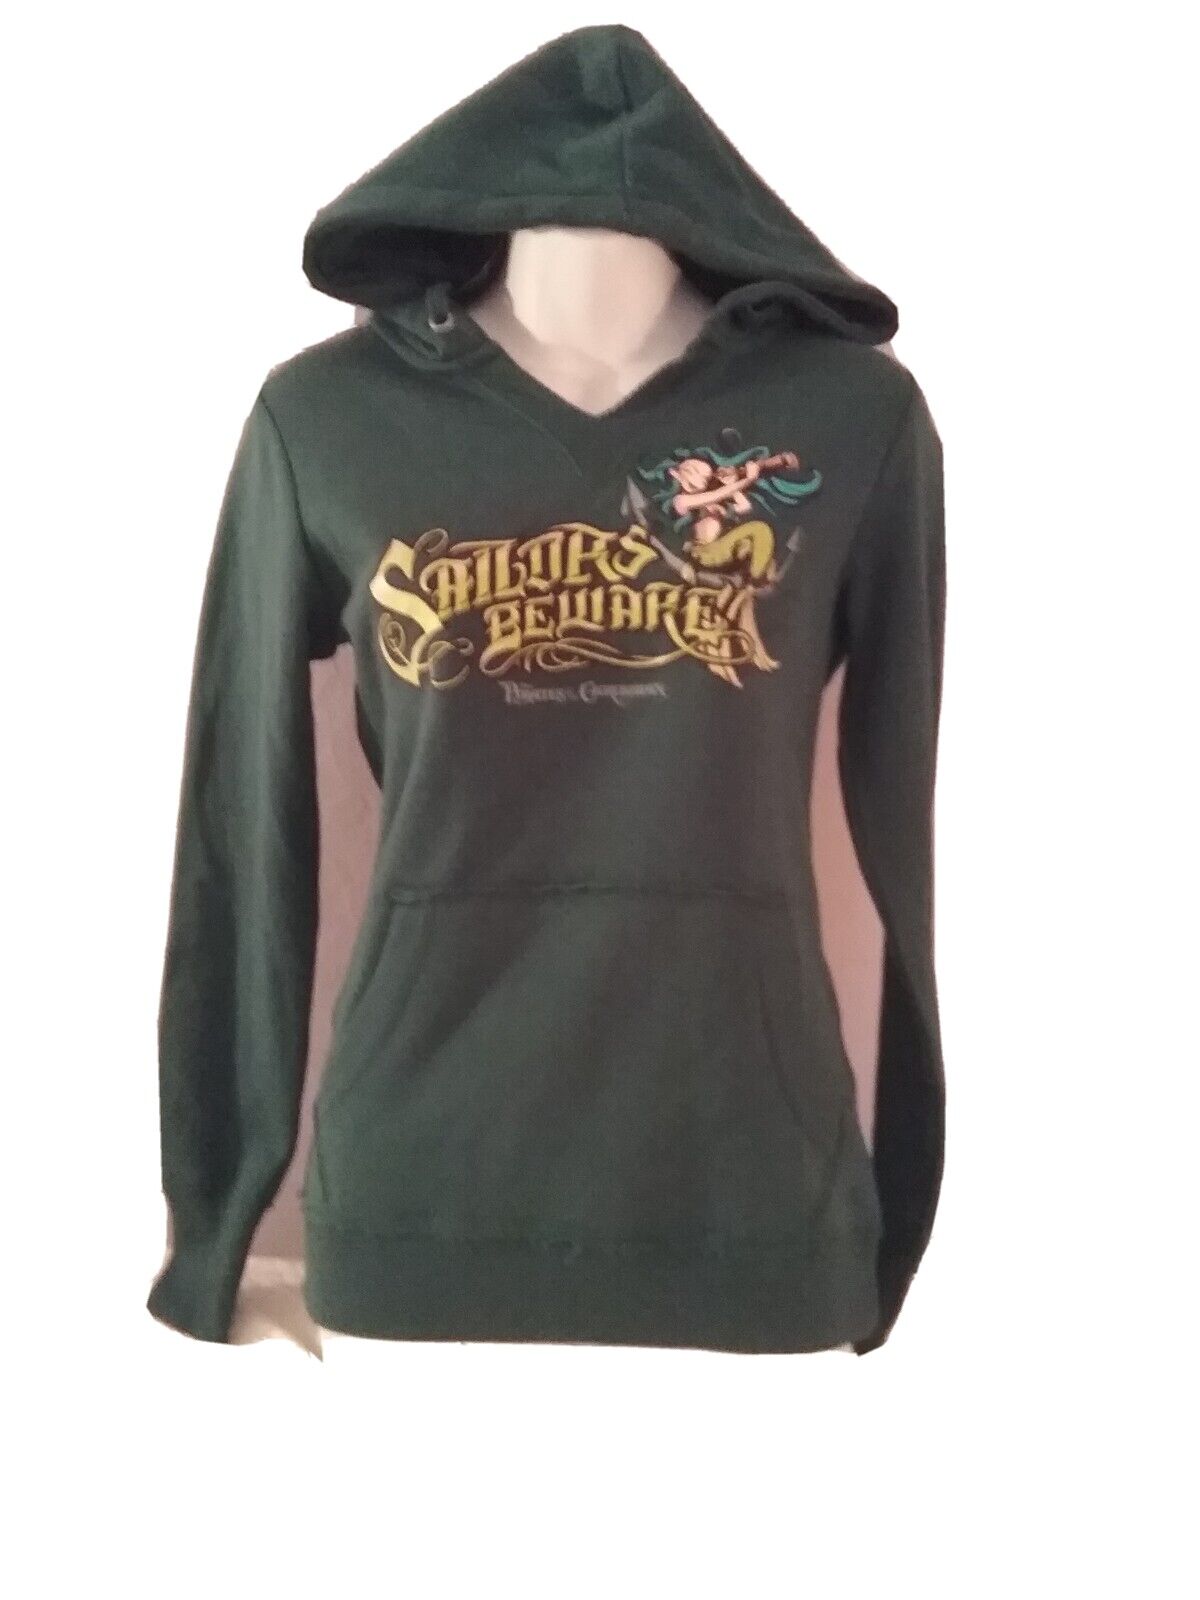 Disney Parks Sailor Beware Pirates Of The Caribbean Green Hoodie XS Excelent